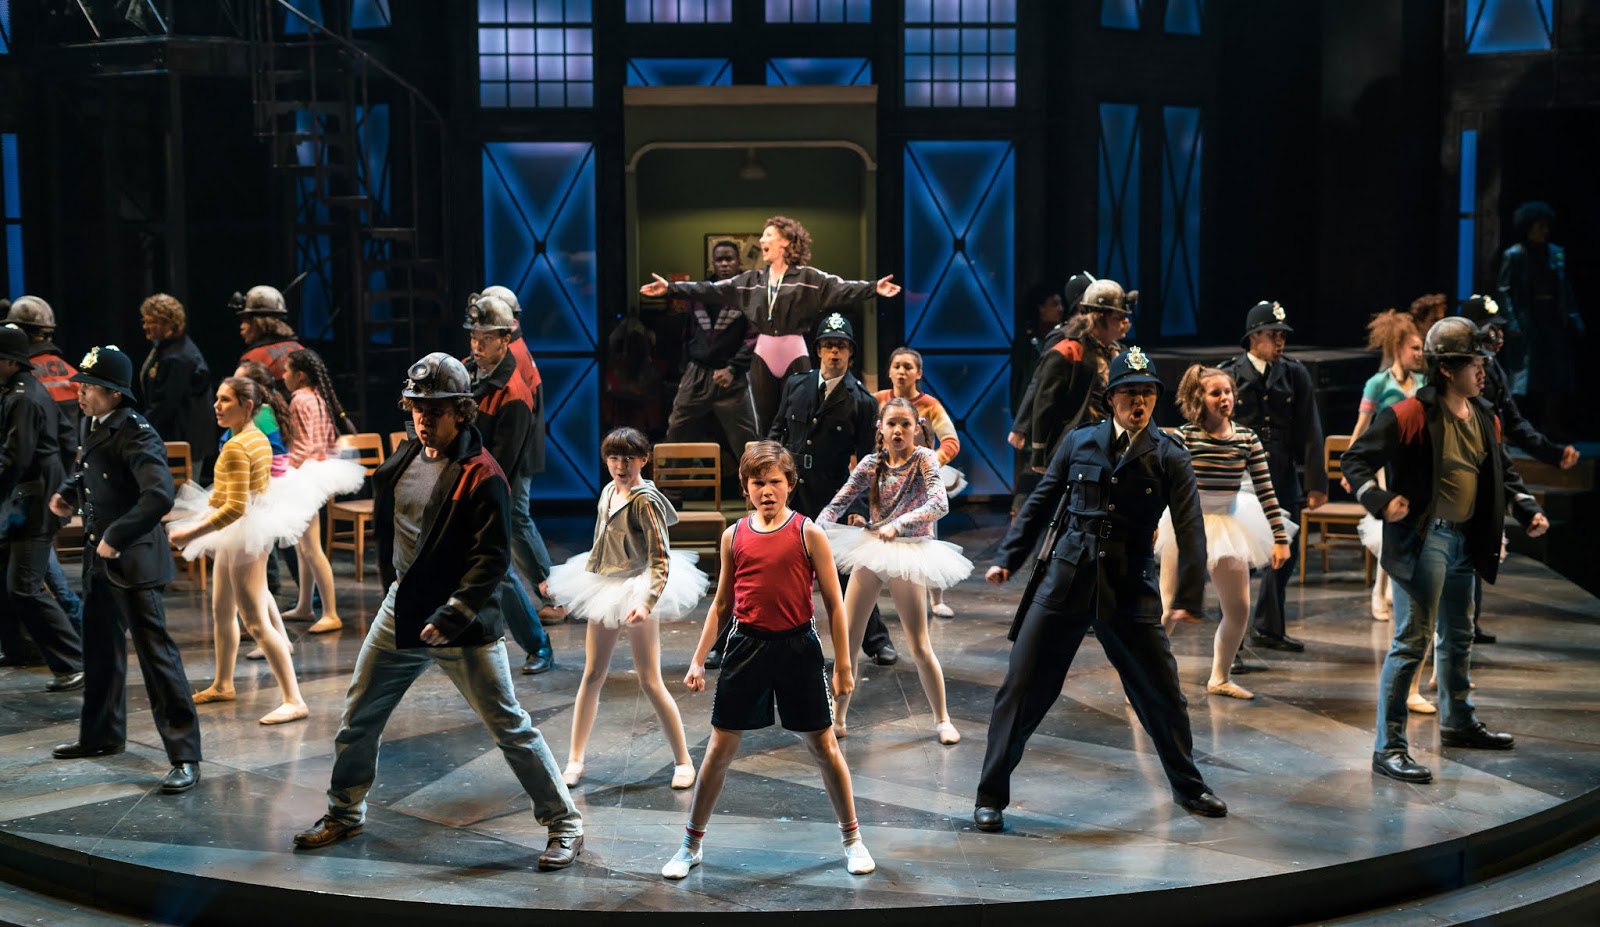 james-karas-reviews-and-views-billy-elliot-the-musical-review-of